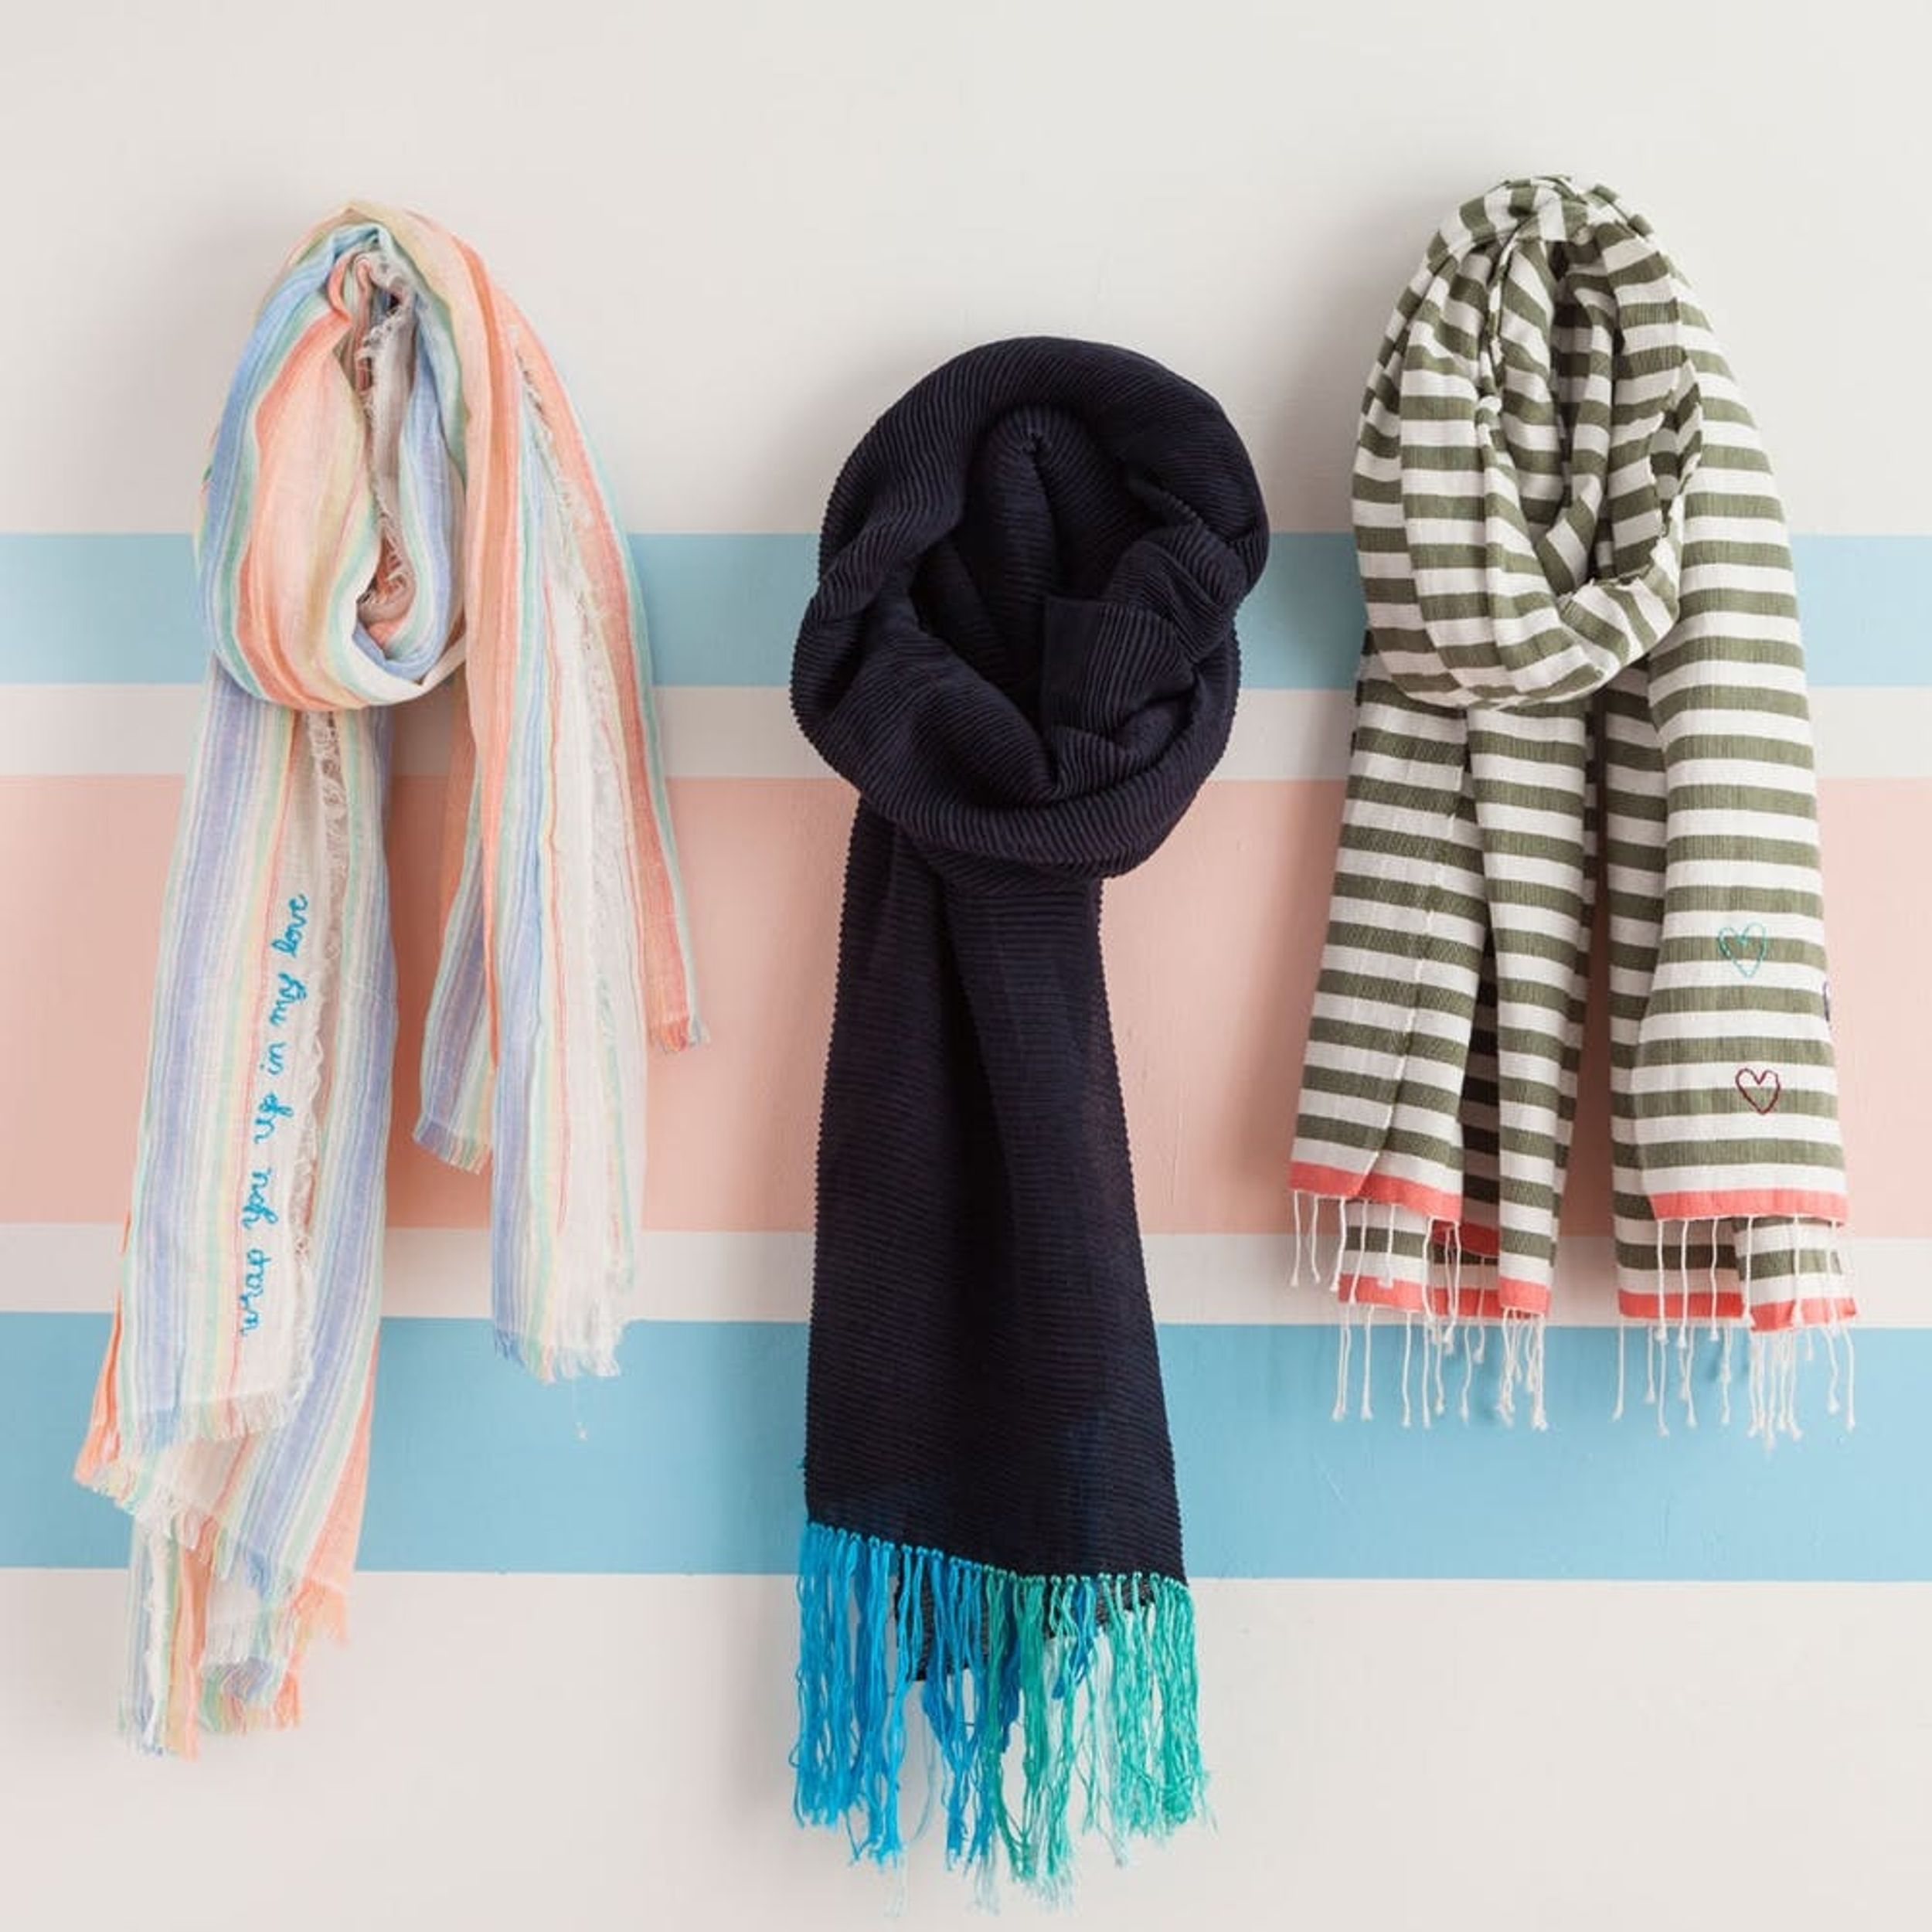 3 Quick Tricks to Fancy Up That Scarf You’re Buying Mom